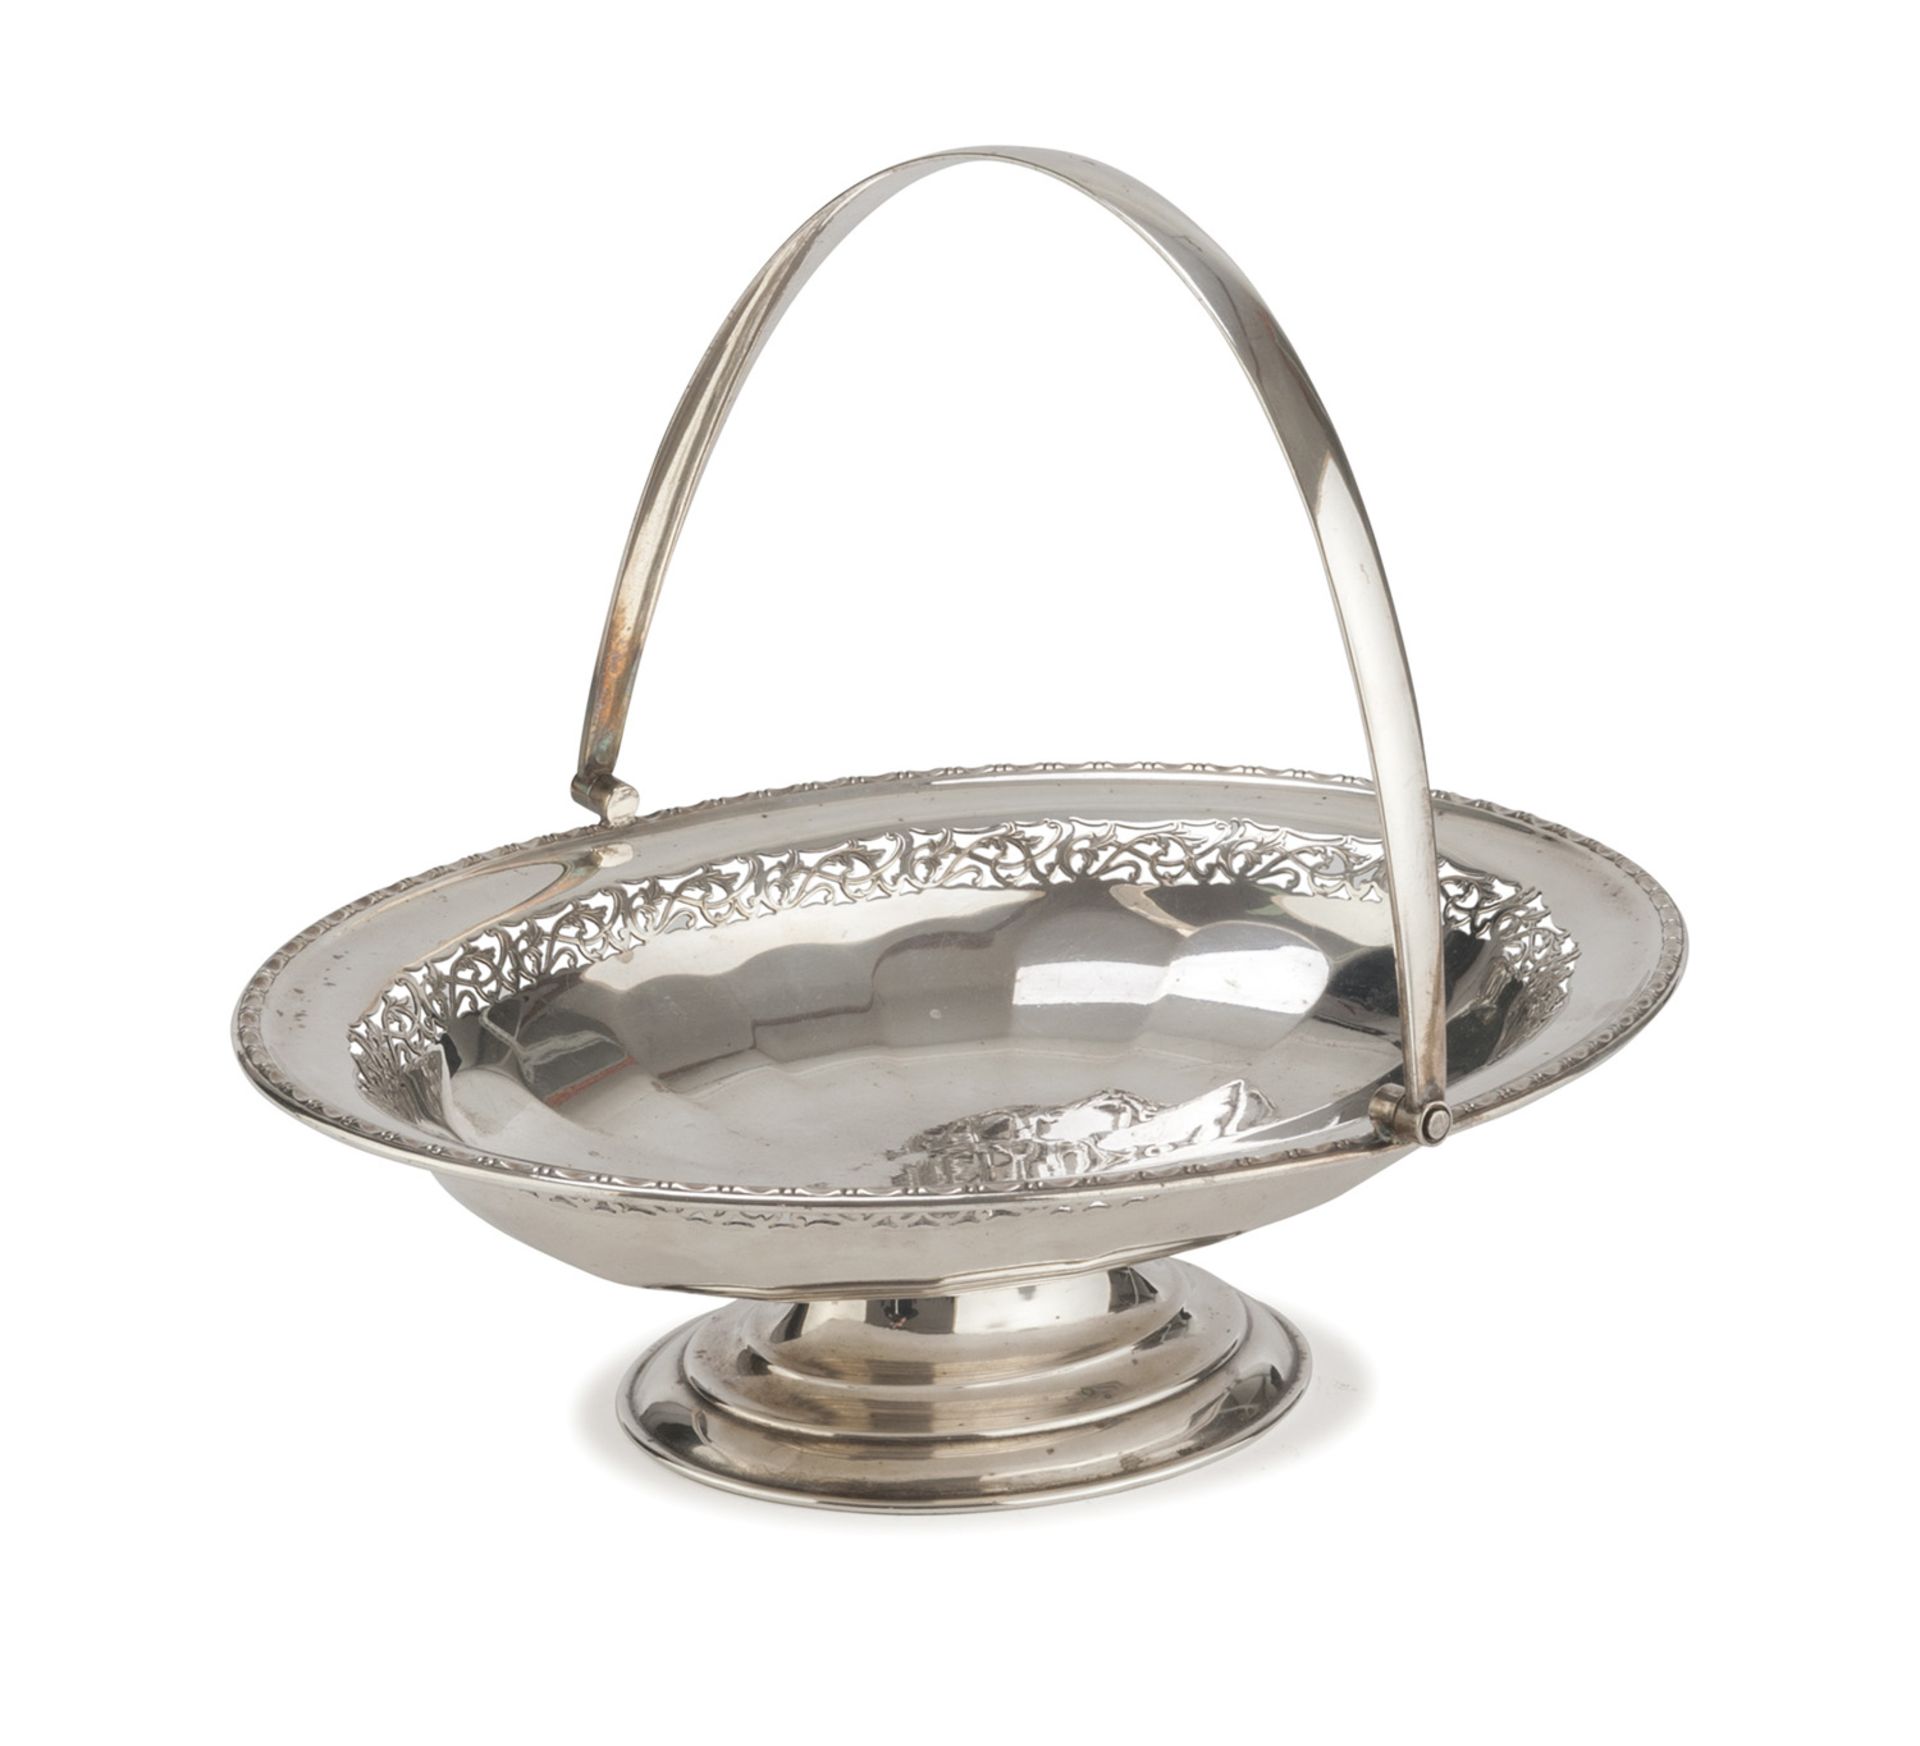 SILVER-PLATED FRUIT BASKET, UNITED KINGDOM 20TH CENTURY of oval shape with pierced edge. Measures